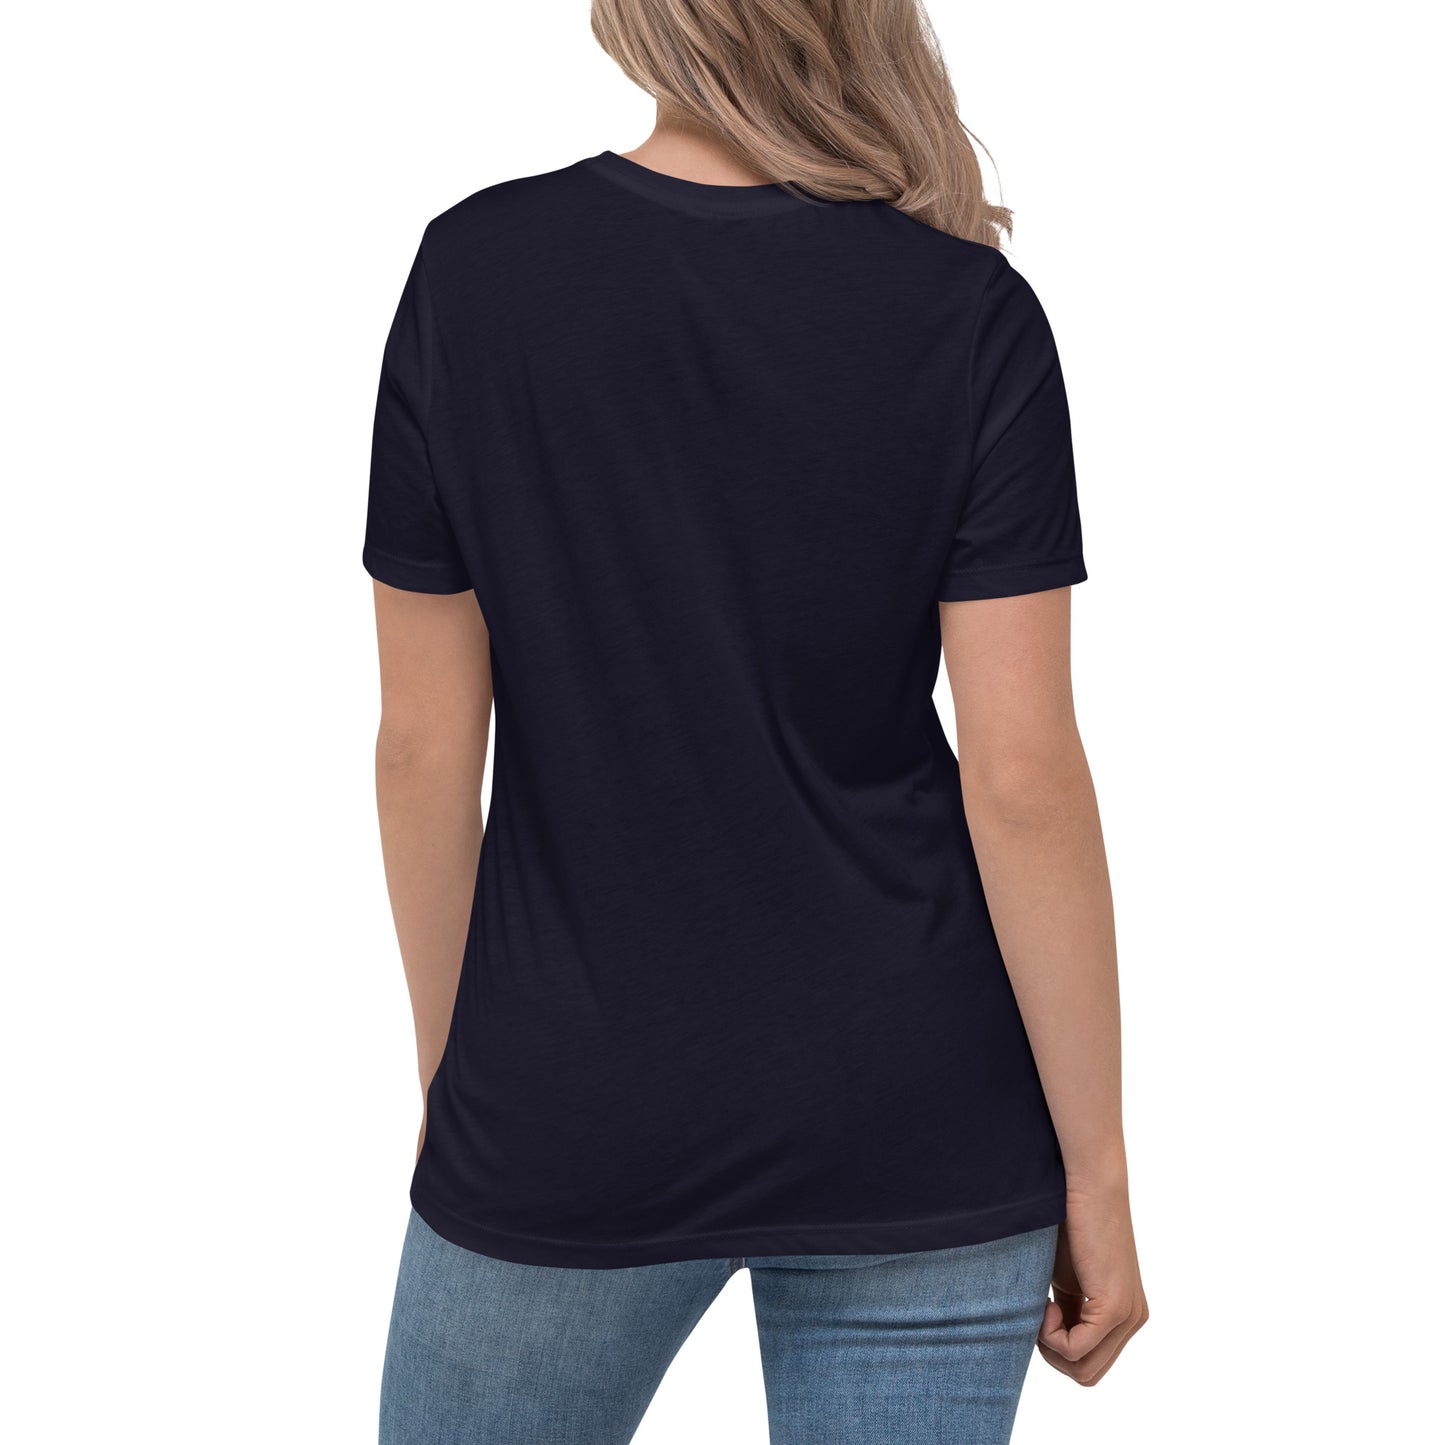 Women's Relaxed Soft & Smooth Premium Quality T-Shirt It's Healthy To Be Happy Design by IOBI Original Apparel